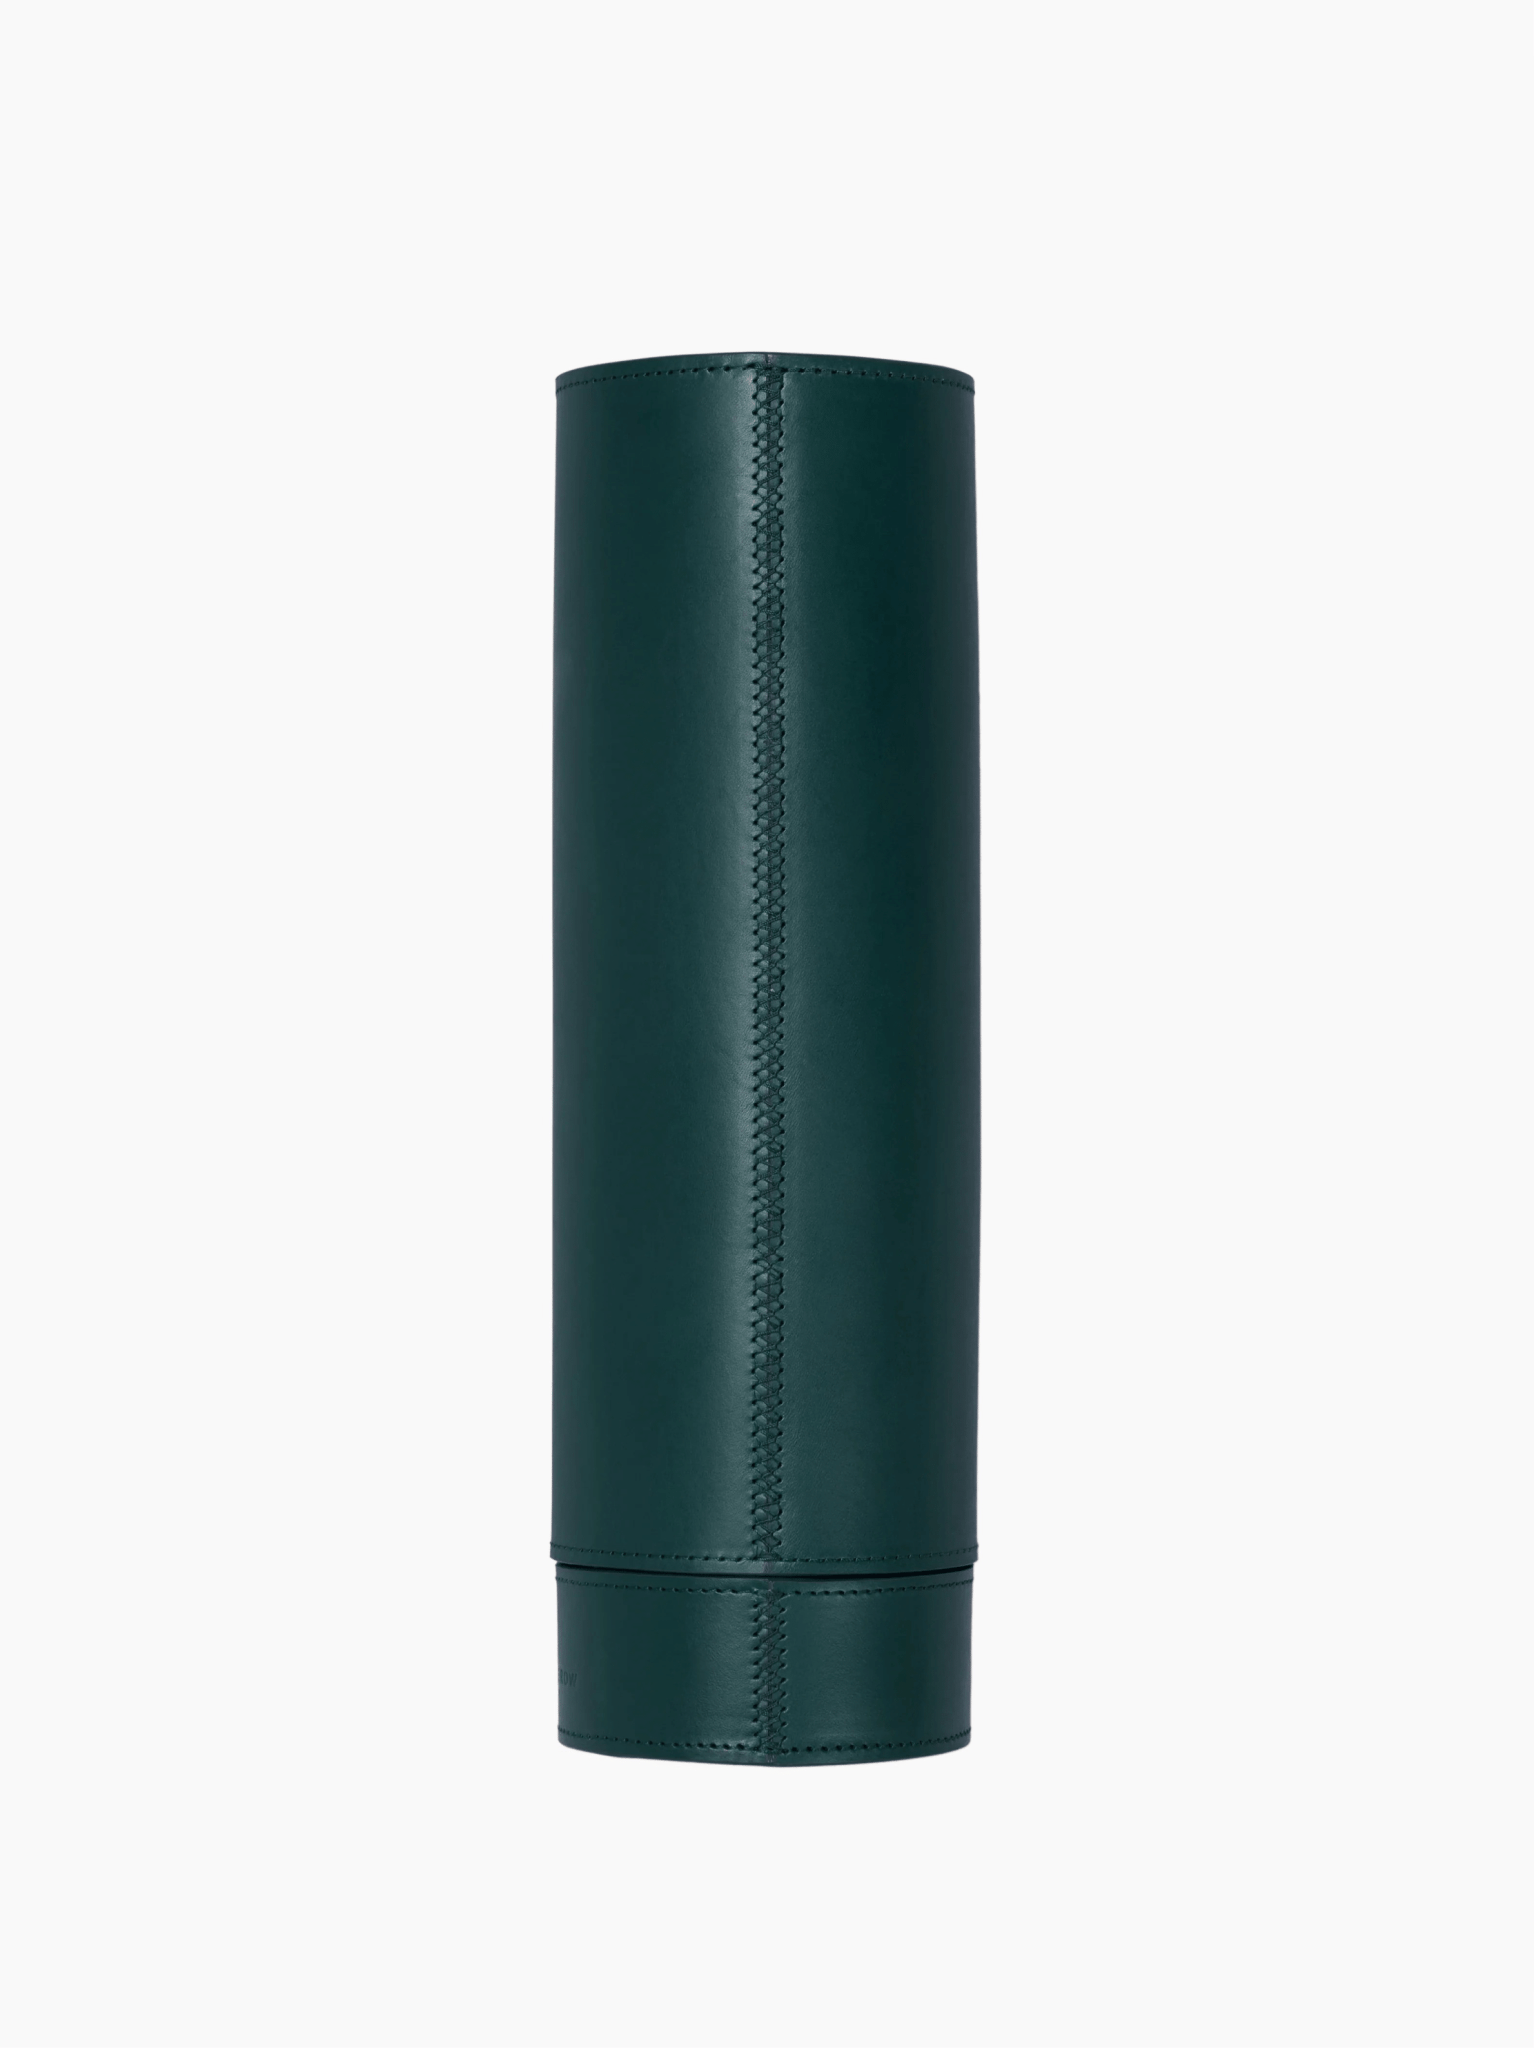 Leather Tennis Ball Holder in Green